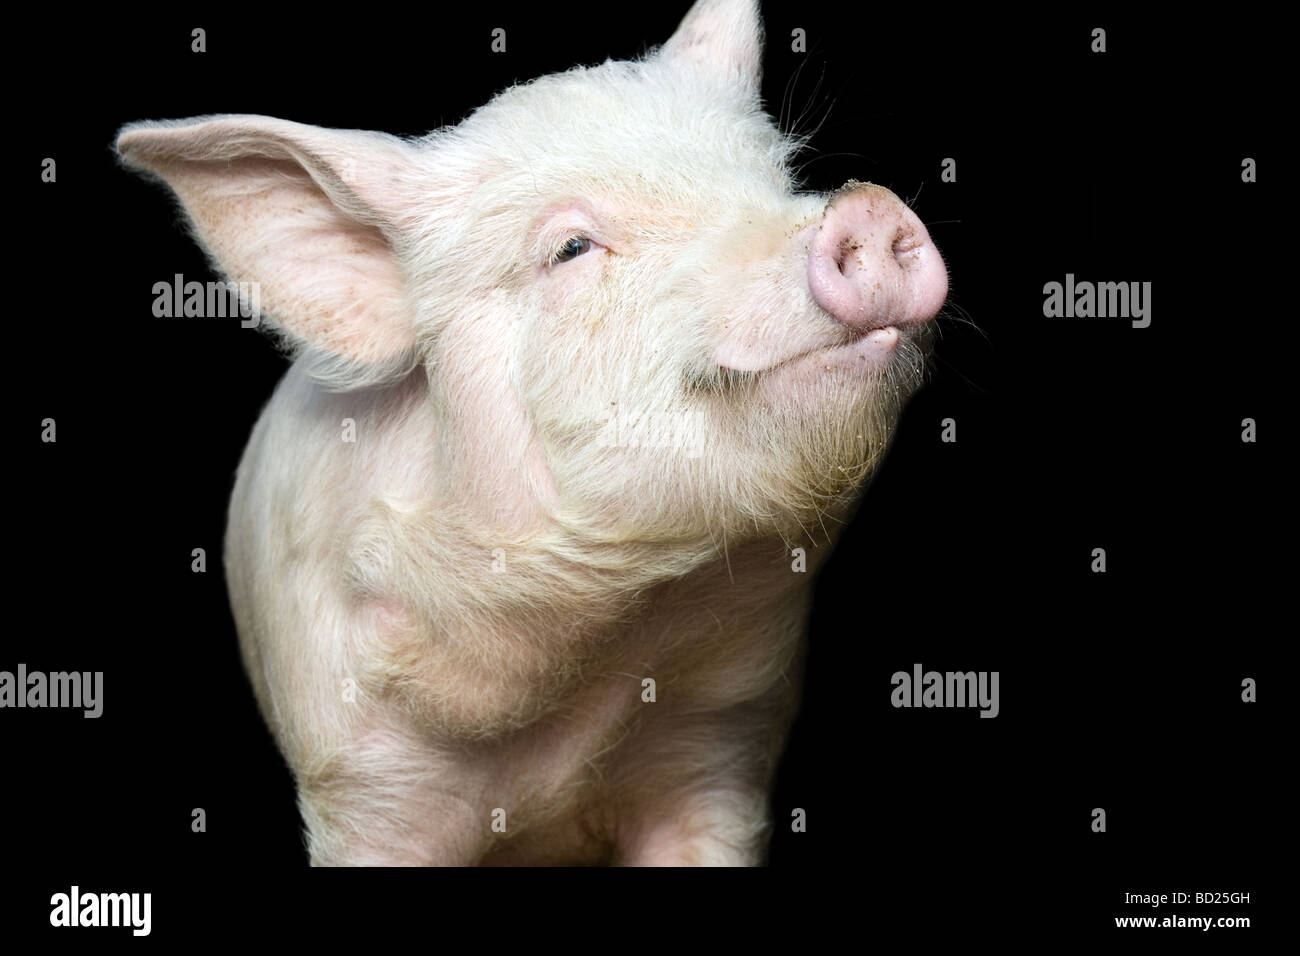 Portrait of a cute pig on black background Stock Photo